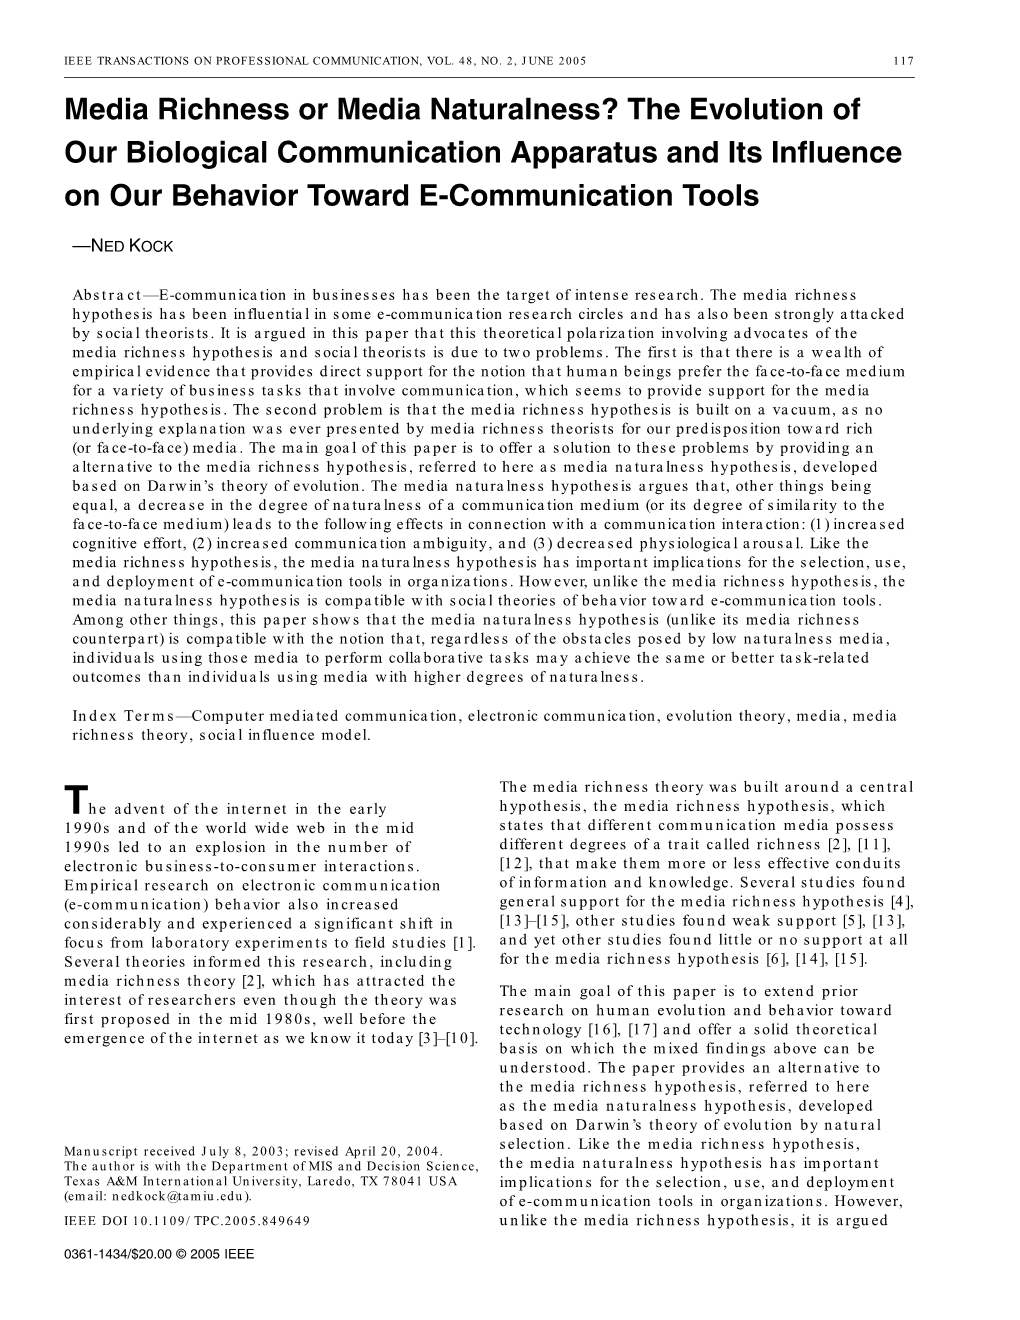 Media Richness Or Media Naturalness? the Evolution of Our Biological Communication Apparatus and Its Influence on Our Behavior Toward E-Communication Tools